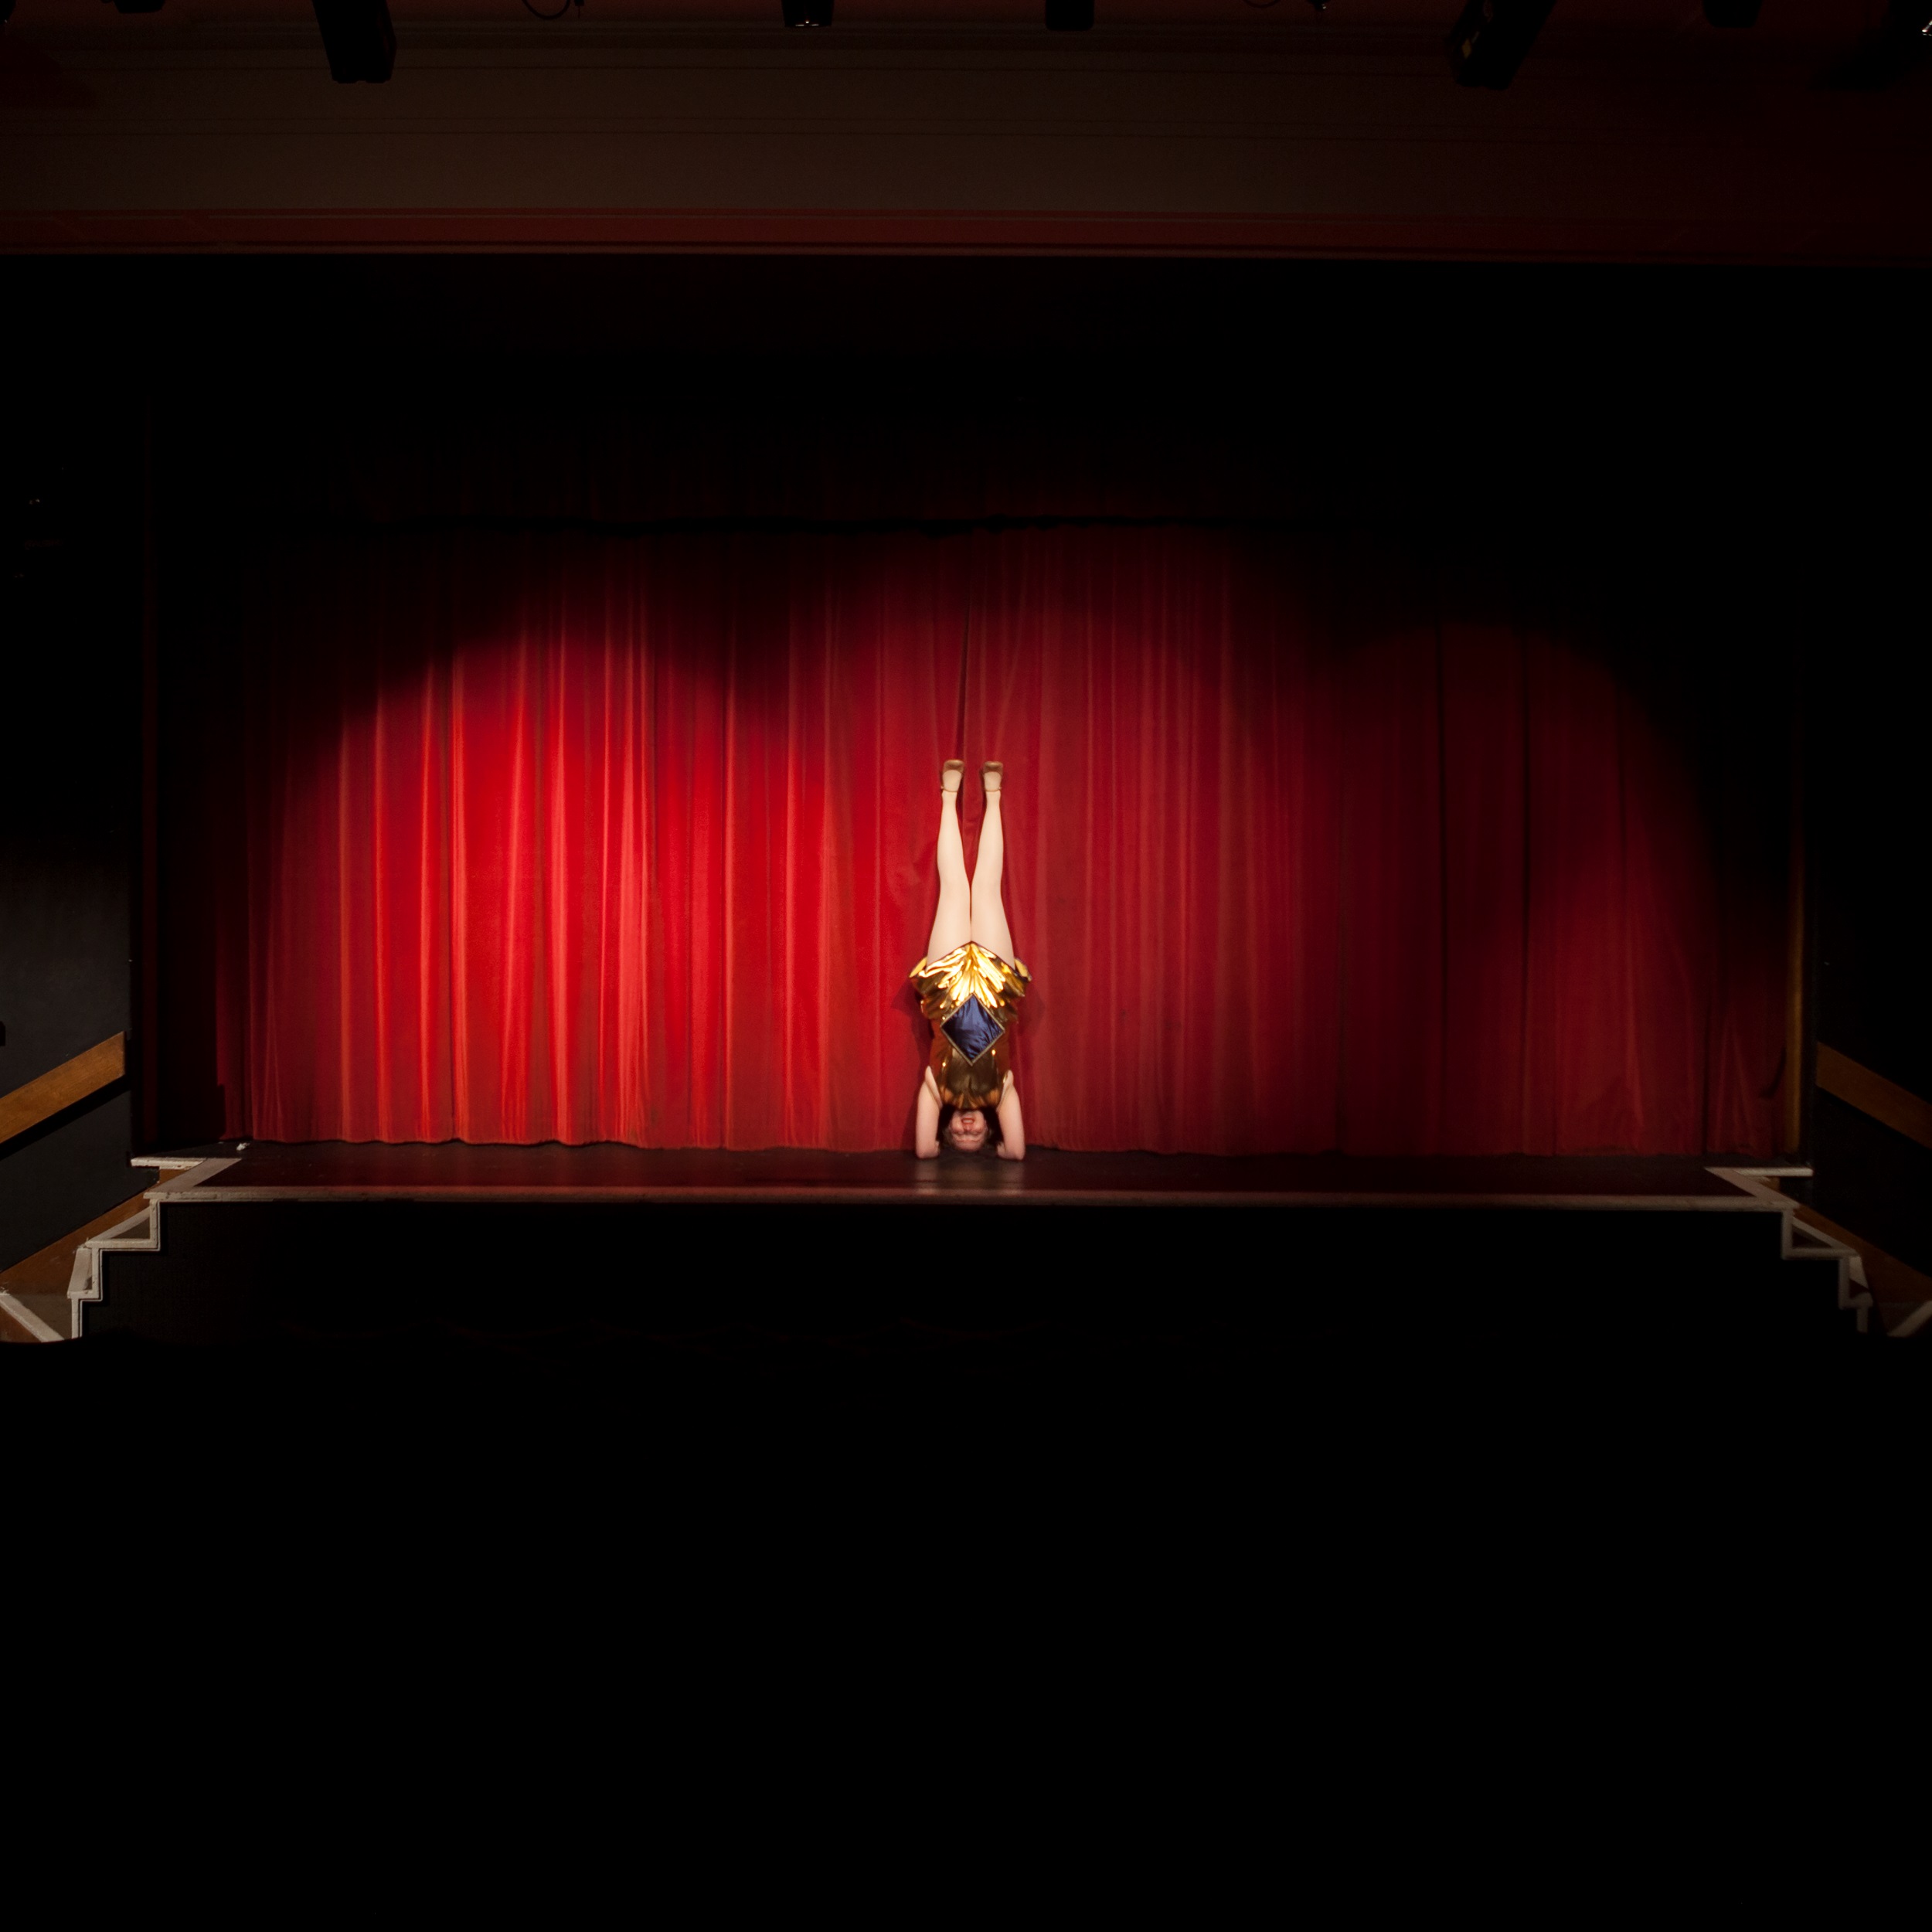 Photograph of a woman in a short blue-and-gold costume doing a headstand on an empty stage, in front of a spotlight red curtain.